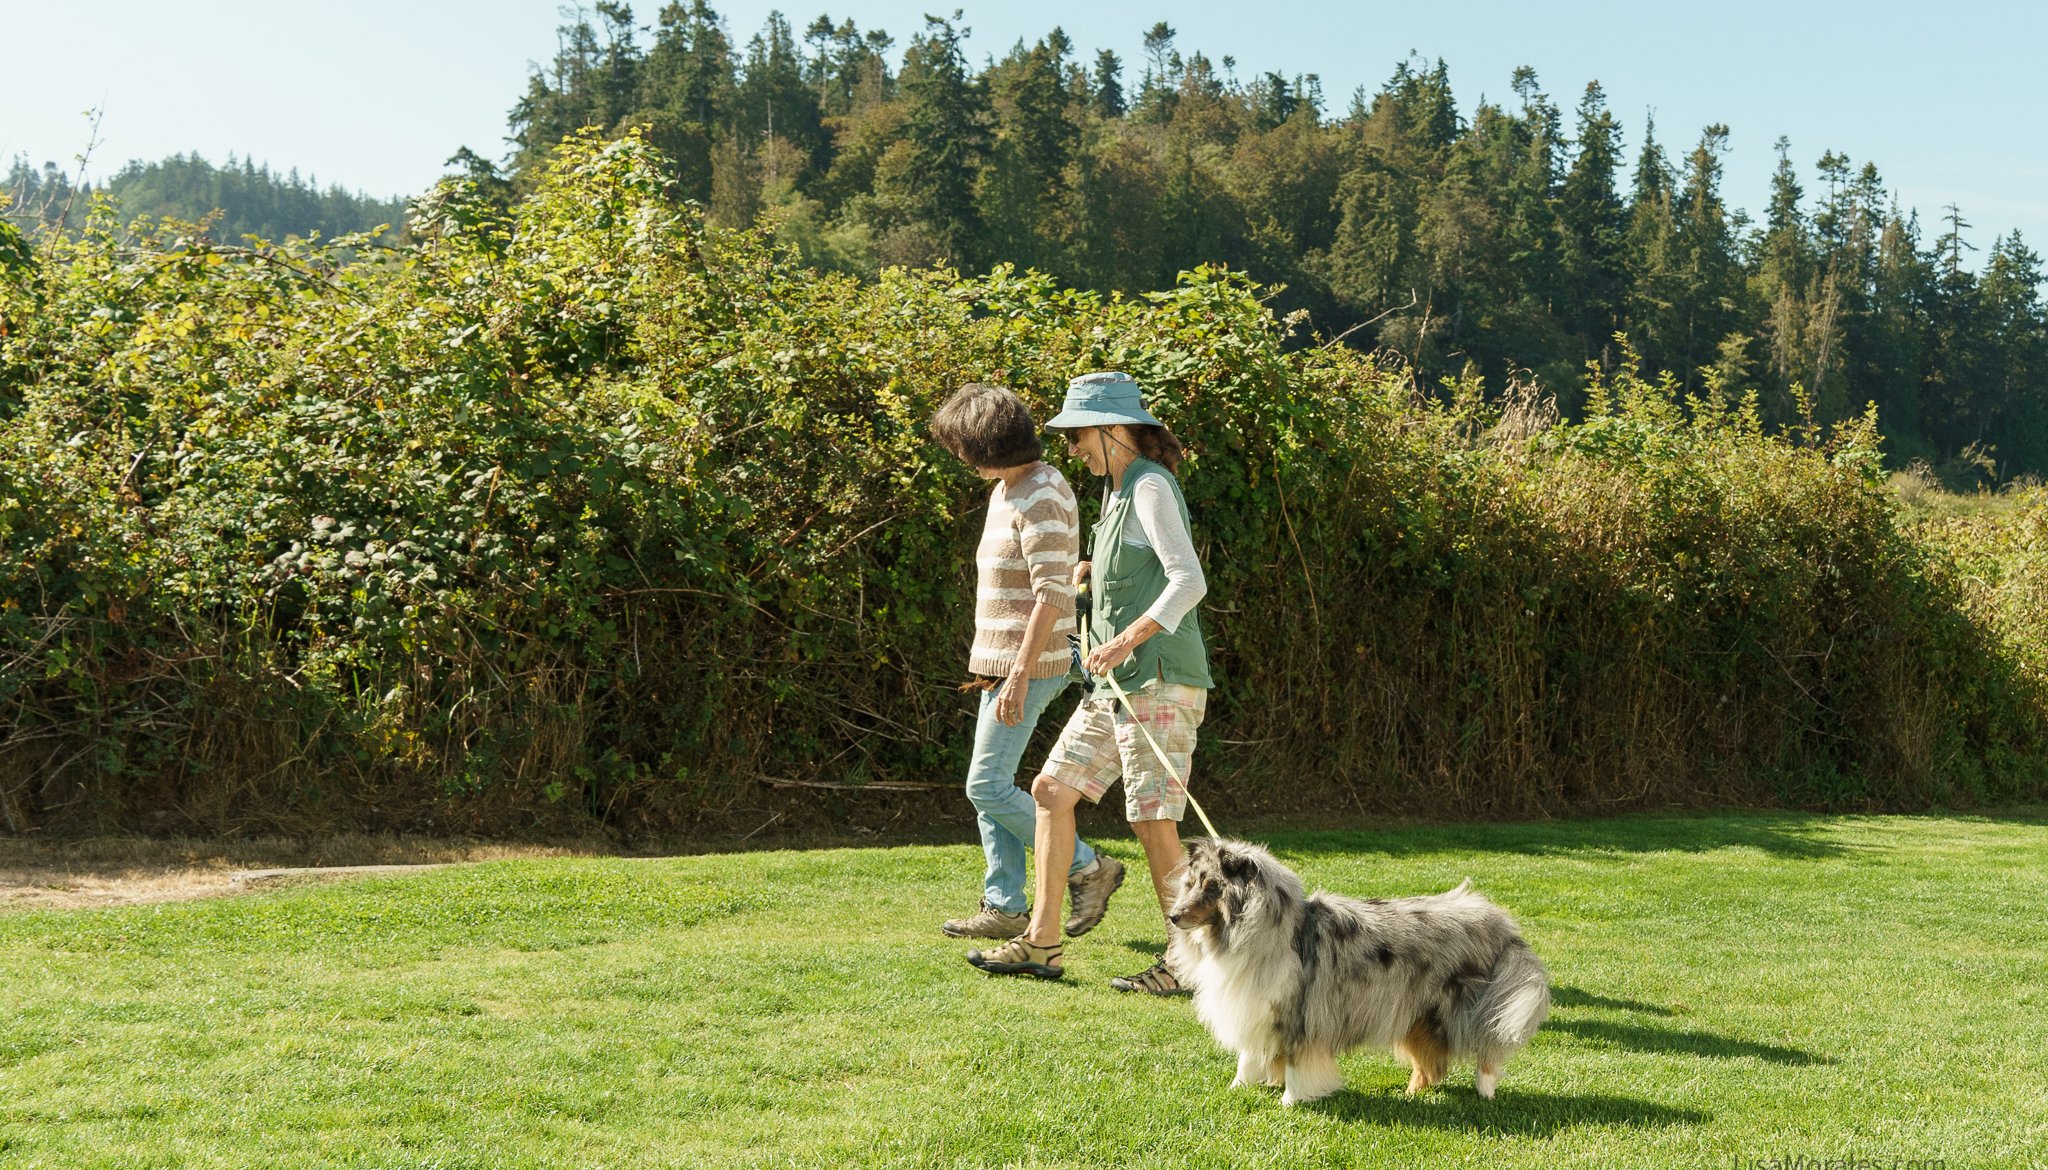 Read Dog-Friendly Whidbey Island by Lisa Morales